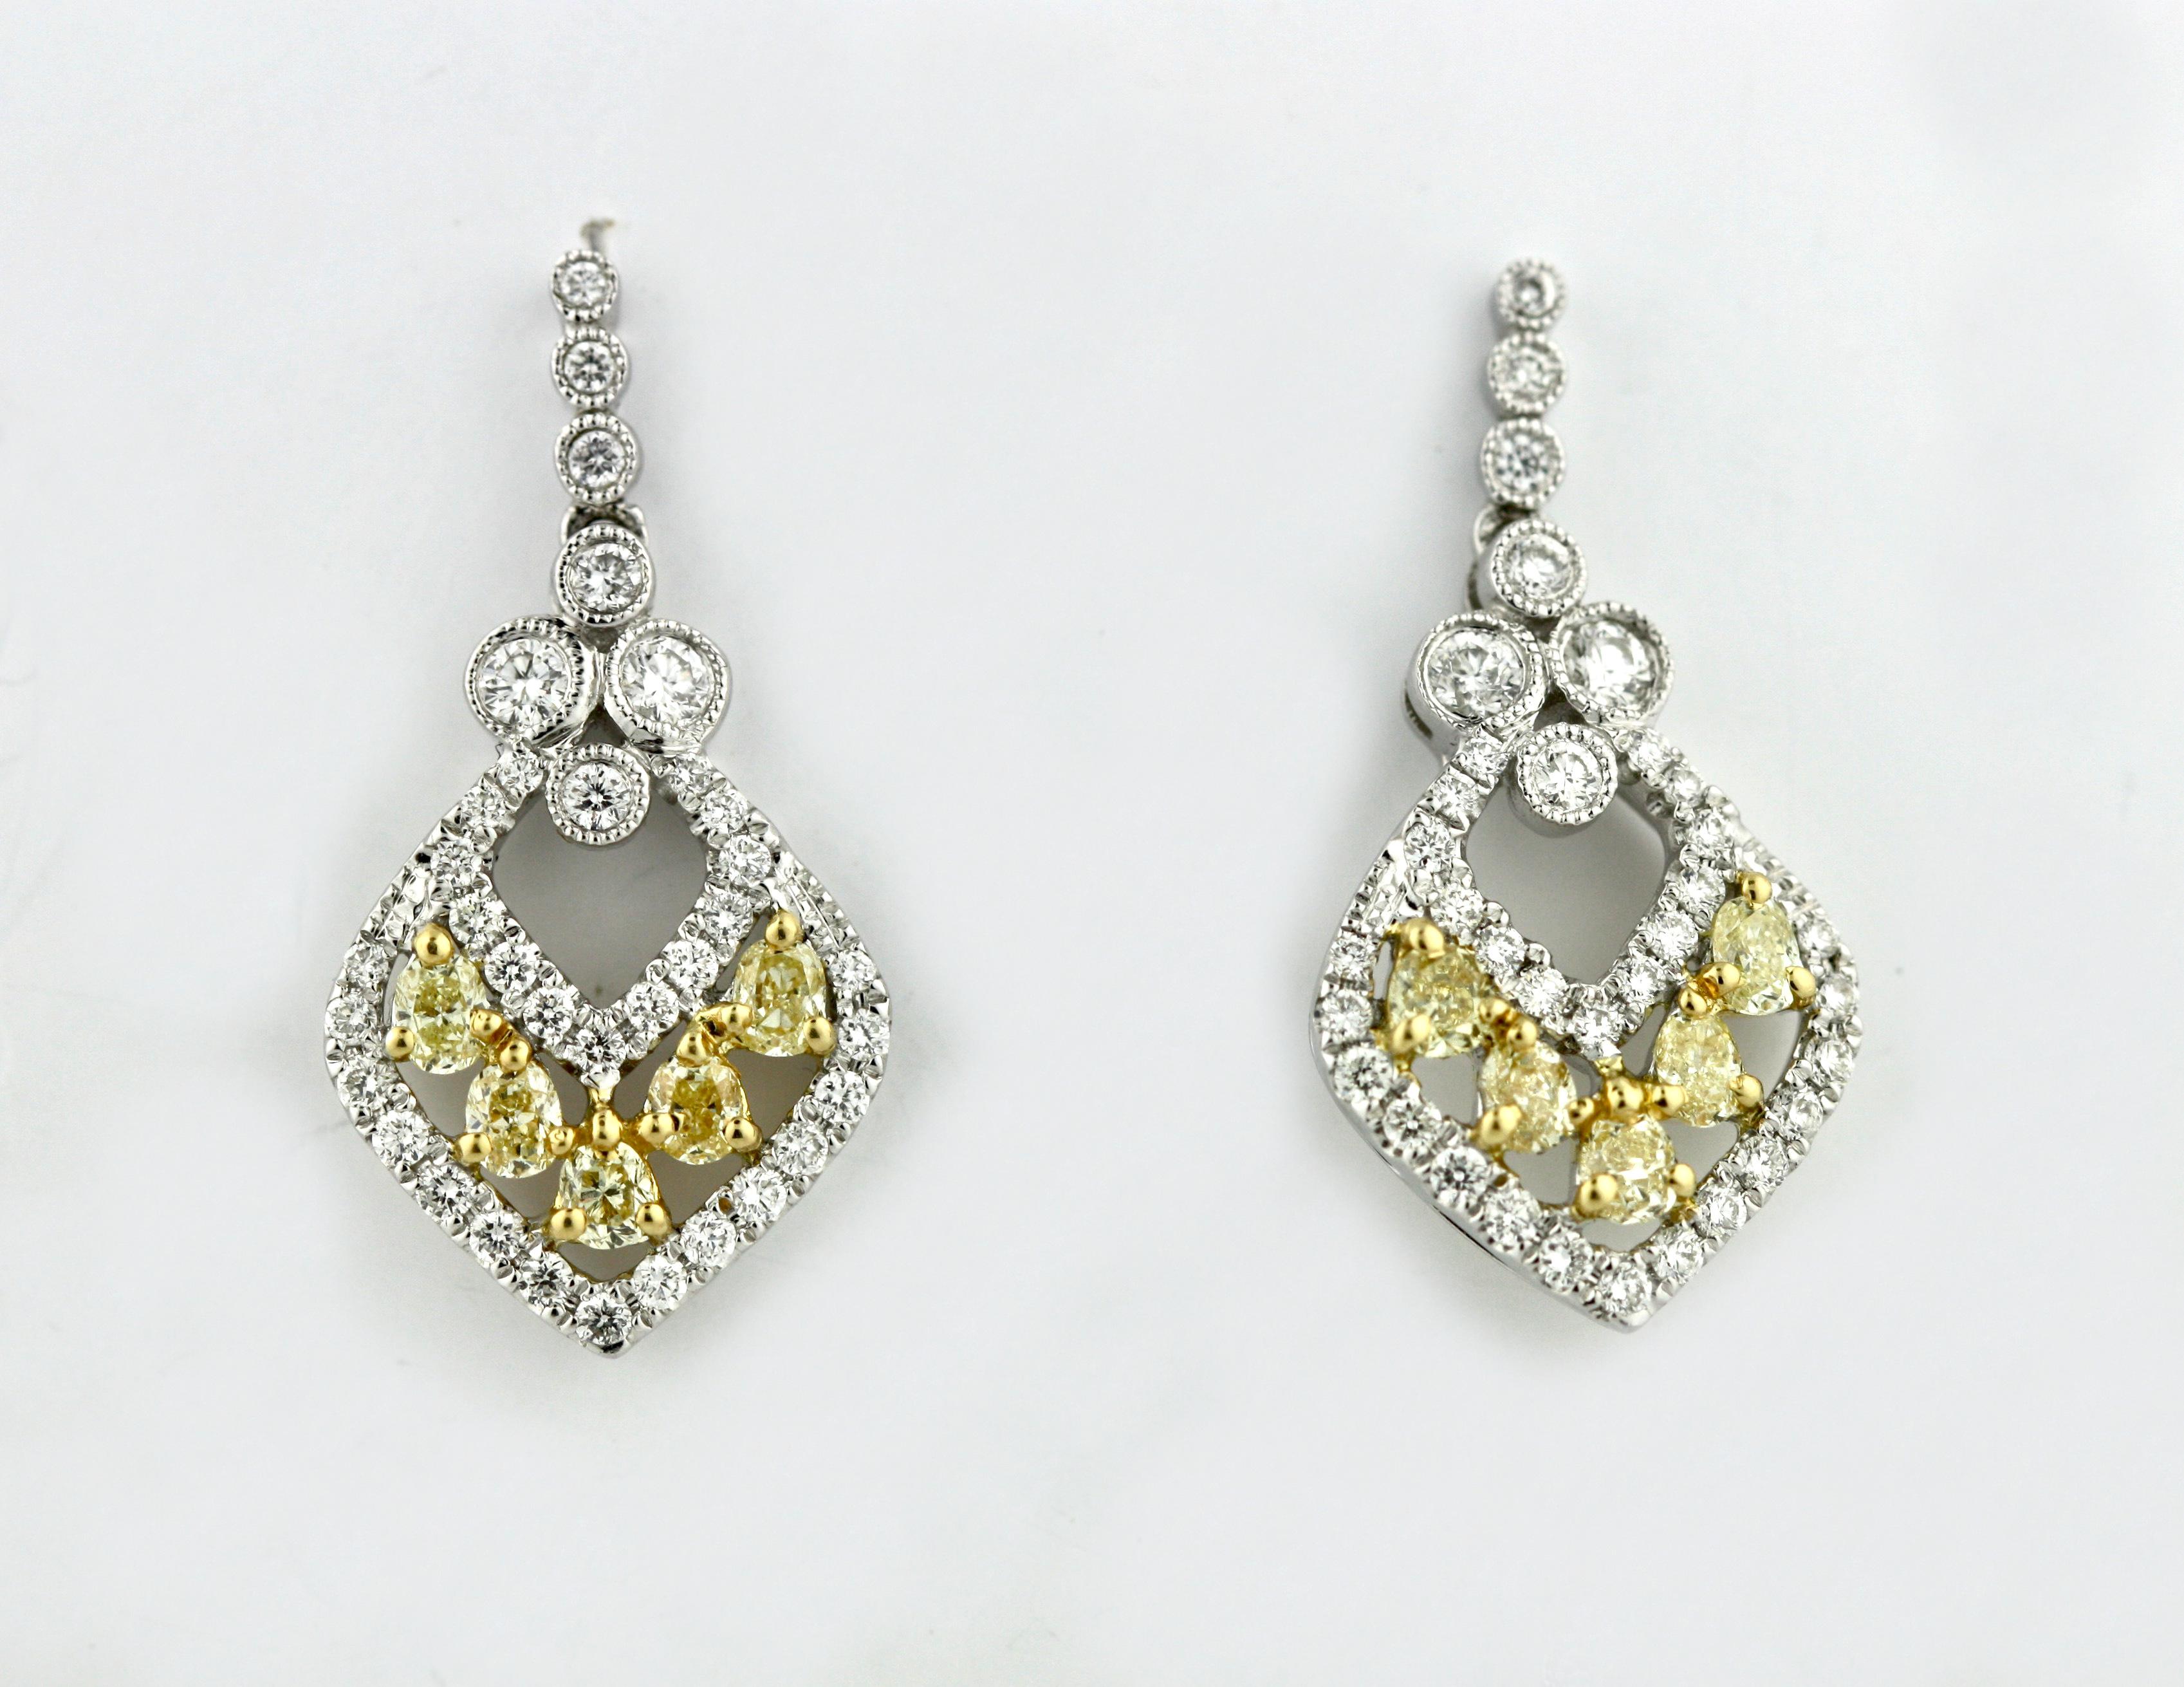 
Pair of Yellow Diamond and Diamond Earrings
Each set with diamonds, post fittings, diamonds weighing a total of approximately 1.59 carats, mounted in 18 karat white gold